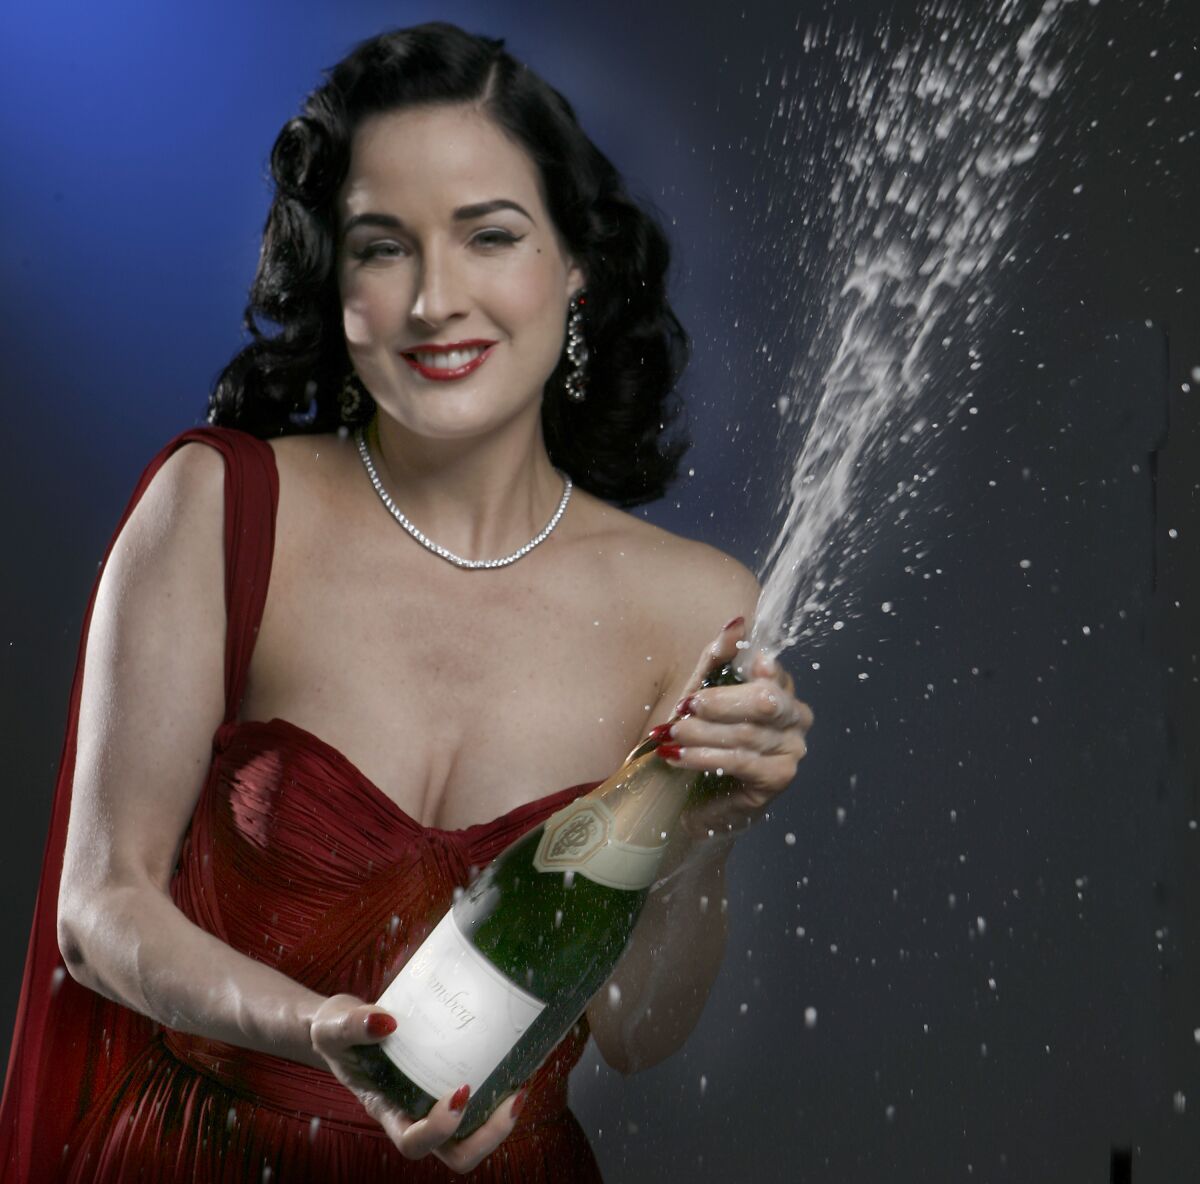 A glamorous woman in a red evening gown pops a bottle of champagne and smiles